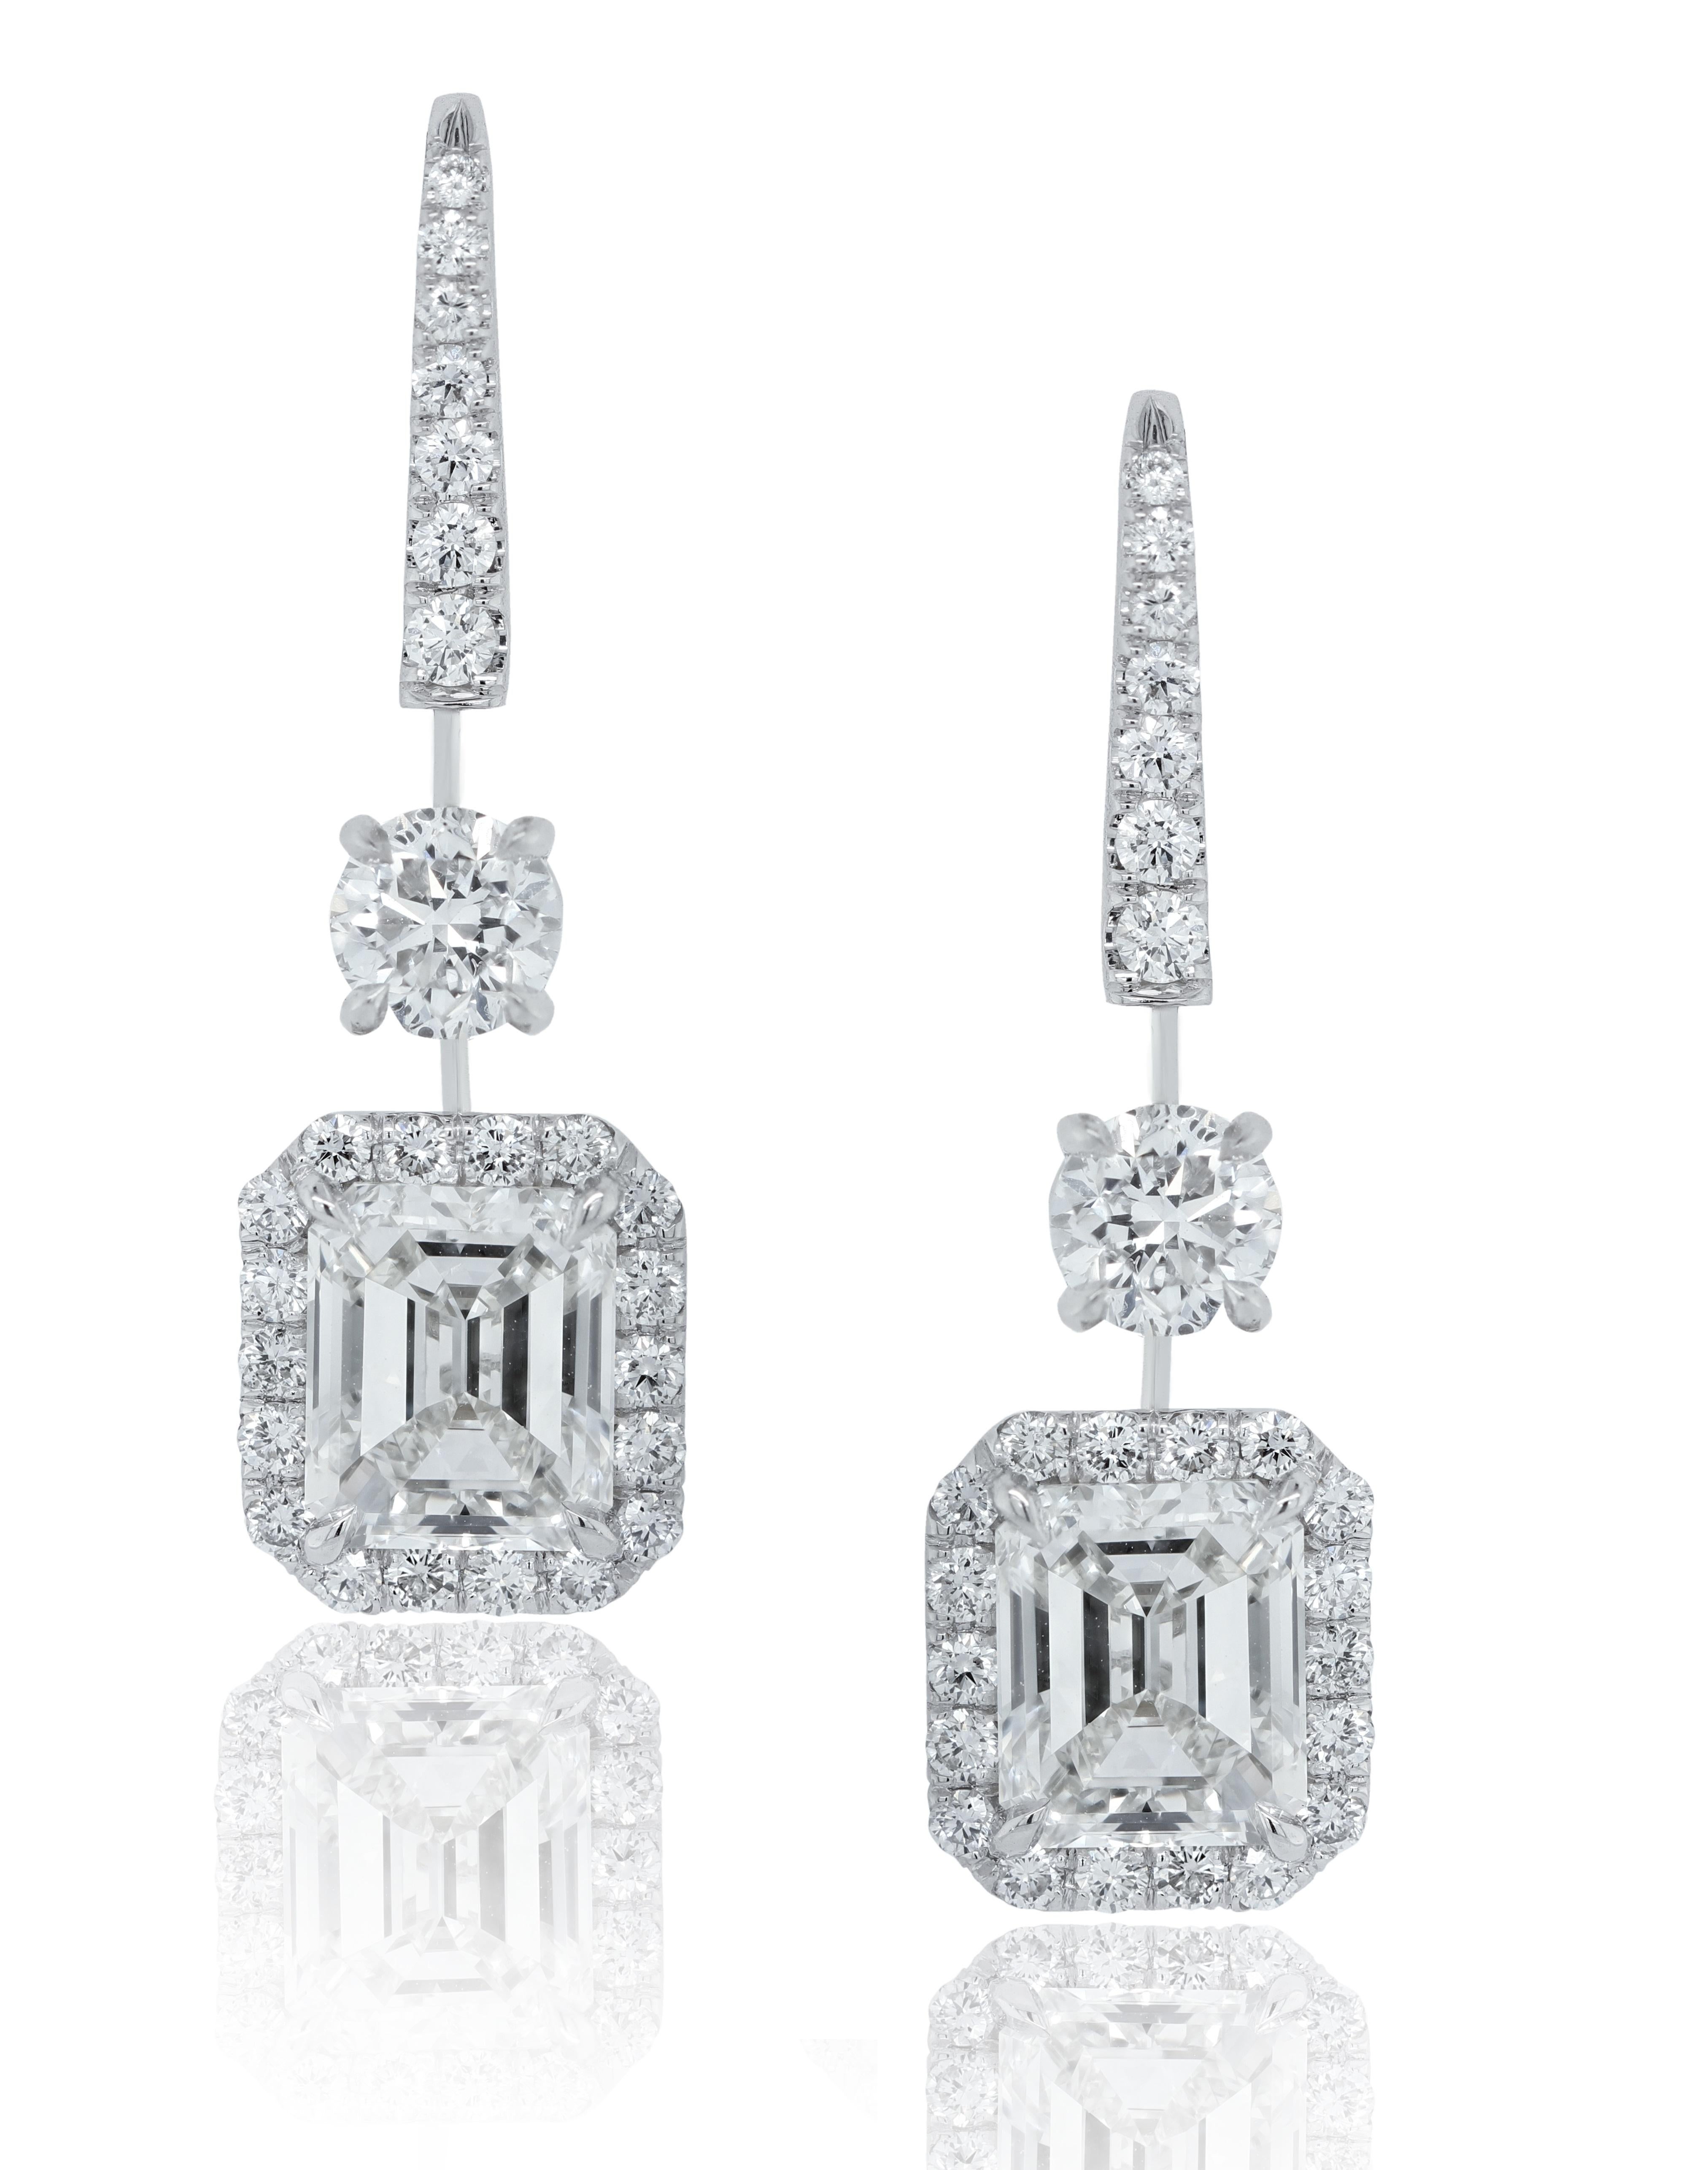 Elegant pair of GIA Certified diamond hanging earrings, features 4.01 Carats of GIA Certified,  I VVS1 & VVS2 GIA#2326536684 & 2294984675, surrounded by 2.00 Carats of VS quality round cut diamonds. 
